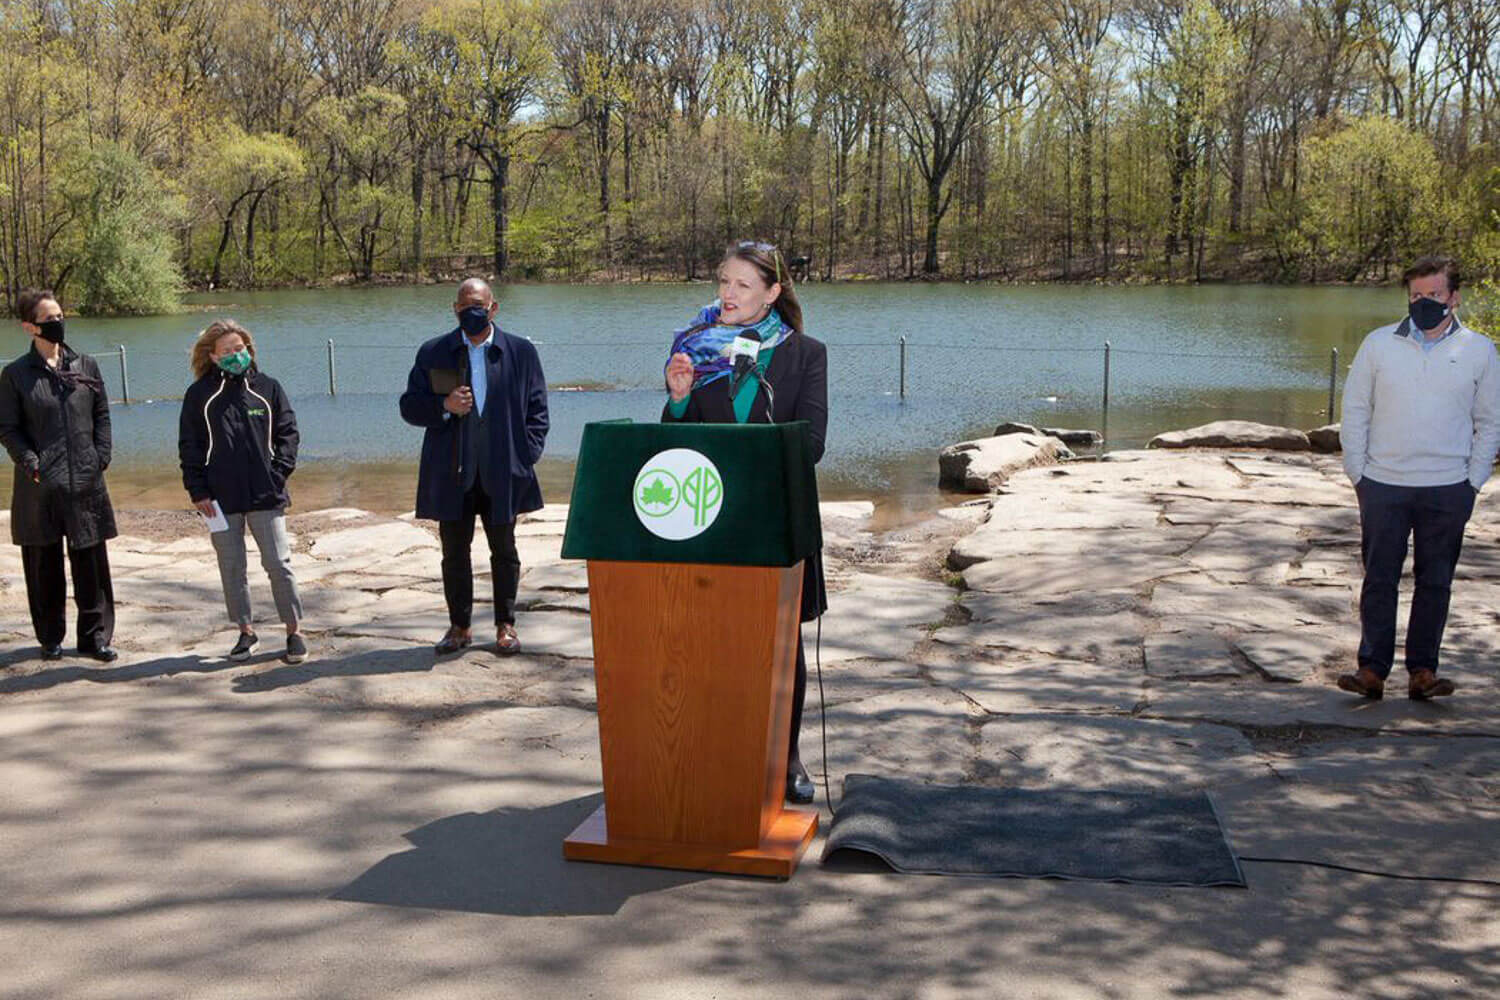 President Michelle J. Anderson addresses the crowd at the April 23 launch of Professor Jennifer Cherrier’s ecoWEIR system that is being used on a pilot project to clean toxic algae from Prospect Park’s water. From left to right are Leslie Wright, New York City Regional Director; Sue Donoghue, President, Prospect Park Alliance; Mitchell J. Silver, New York City Parks Commissioner; and Robert Carroll, New York State Assembly Member.